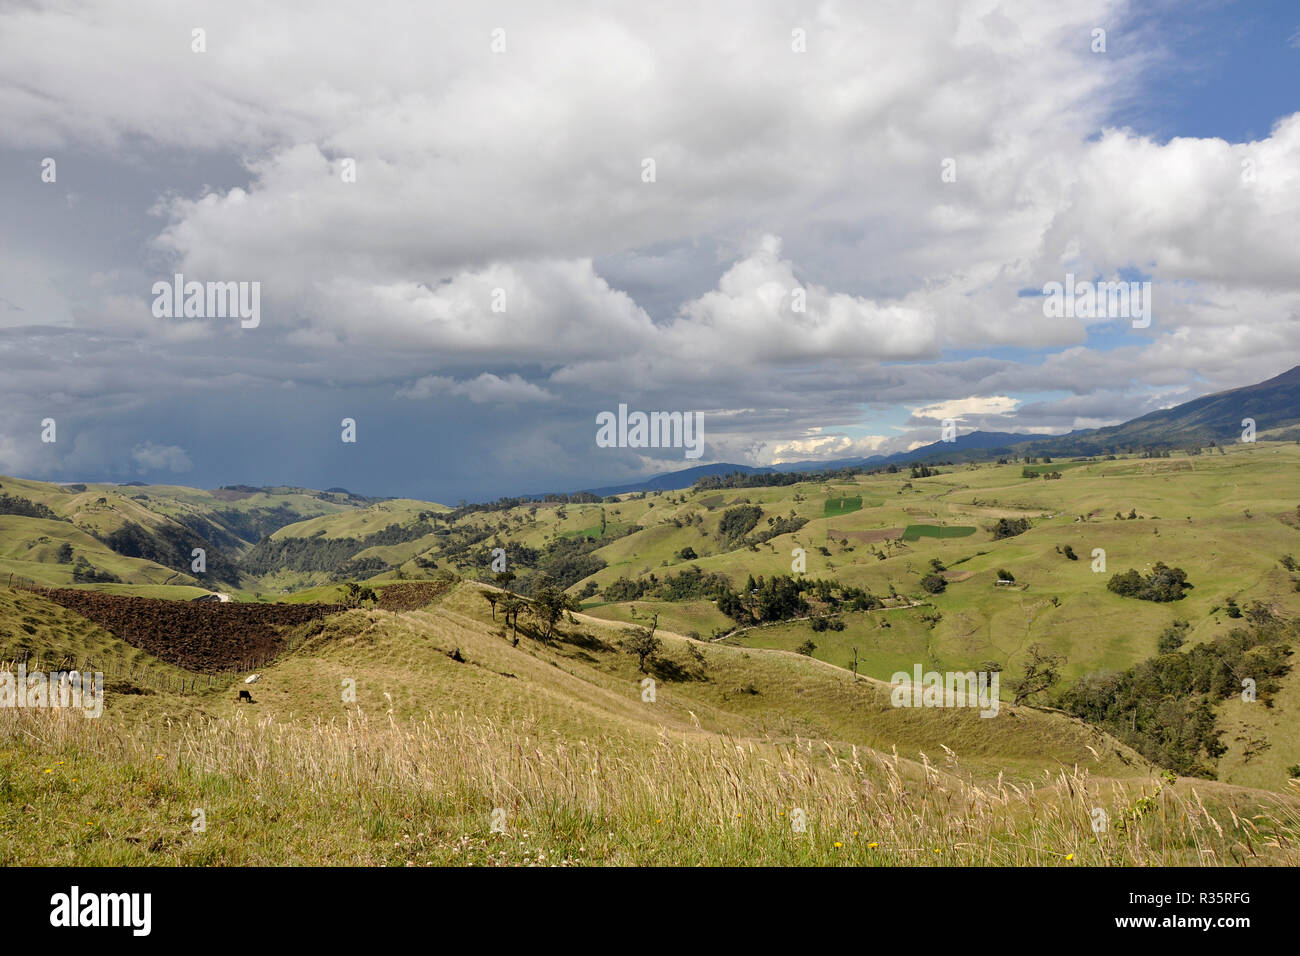 Colombia, St, Agustin, landscape Stock Photo